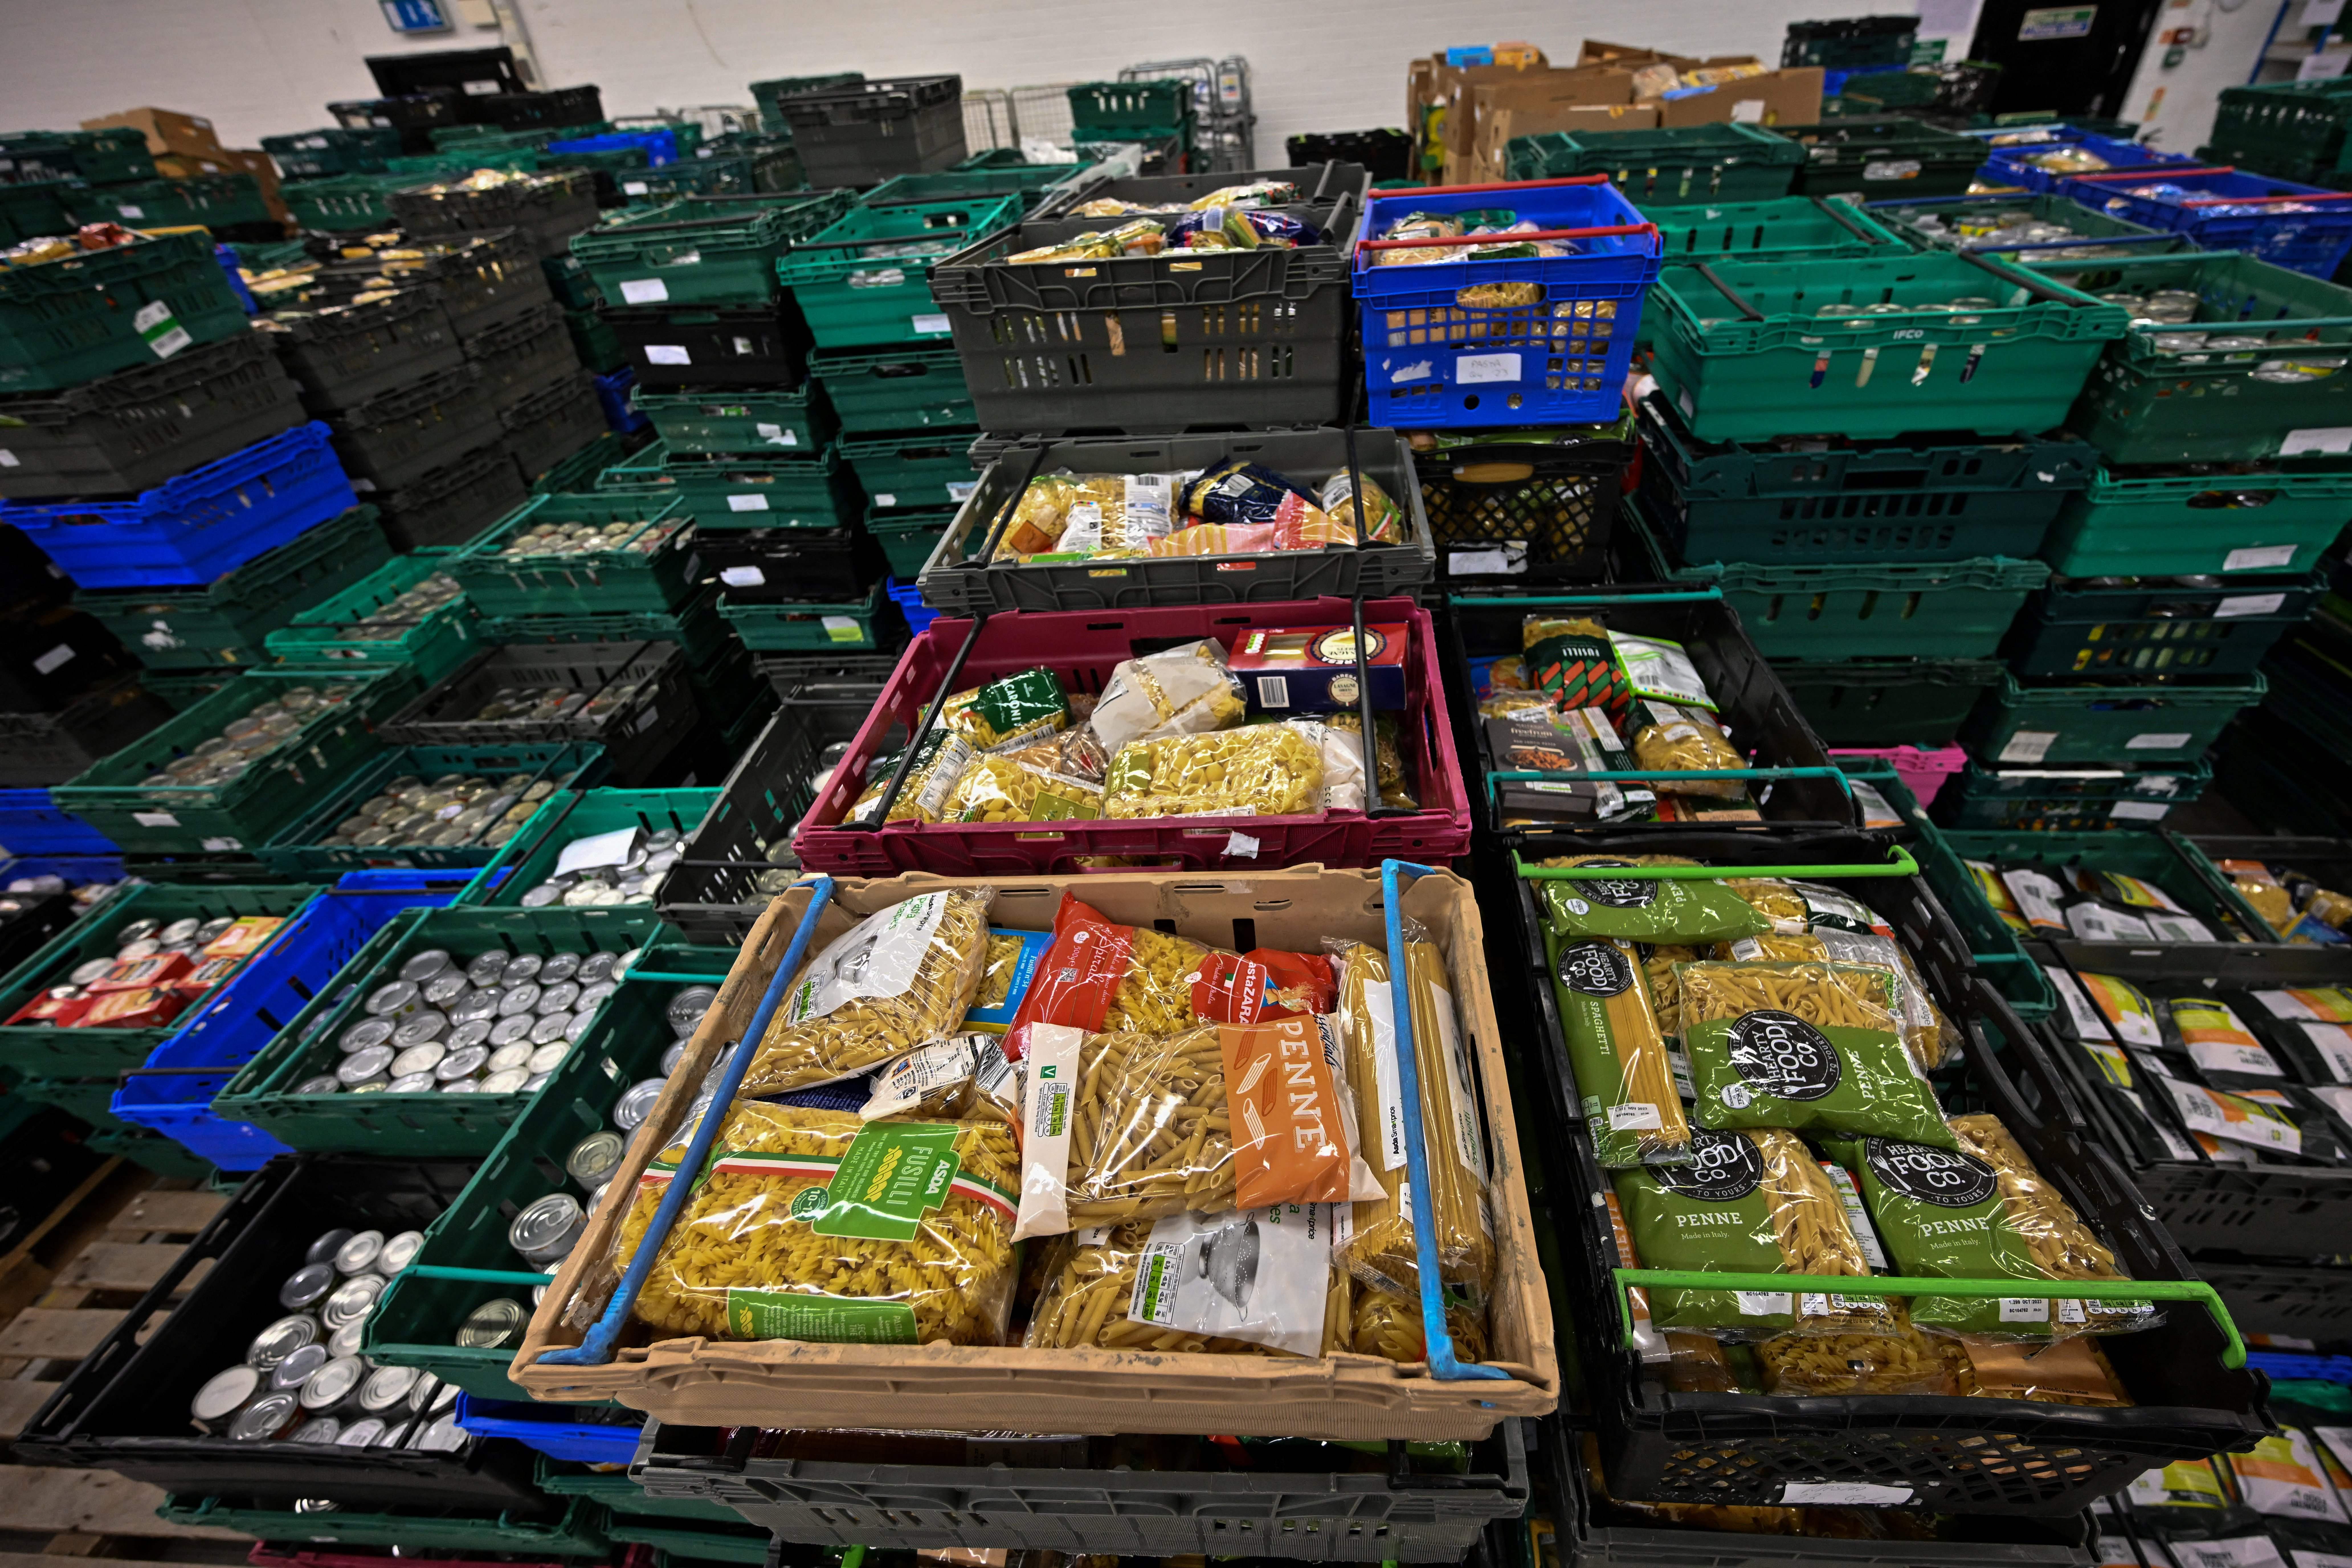 179,000 emergency food parcels were provided to pension-age households in the past year